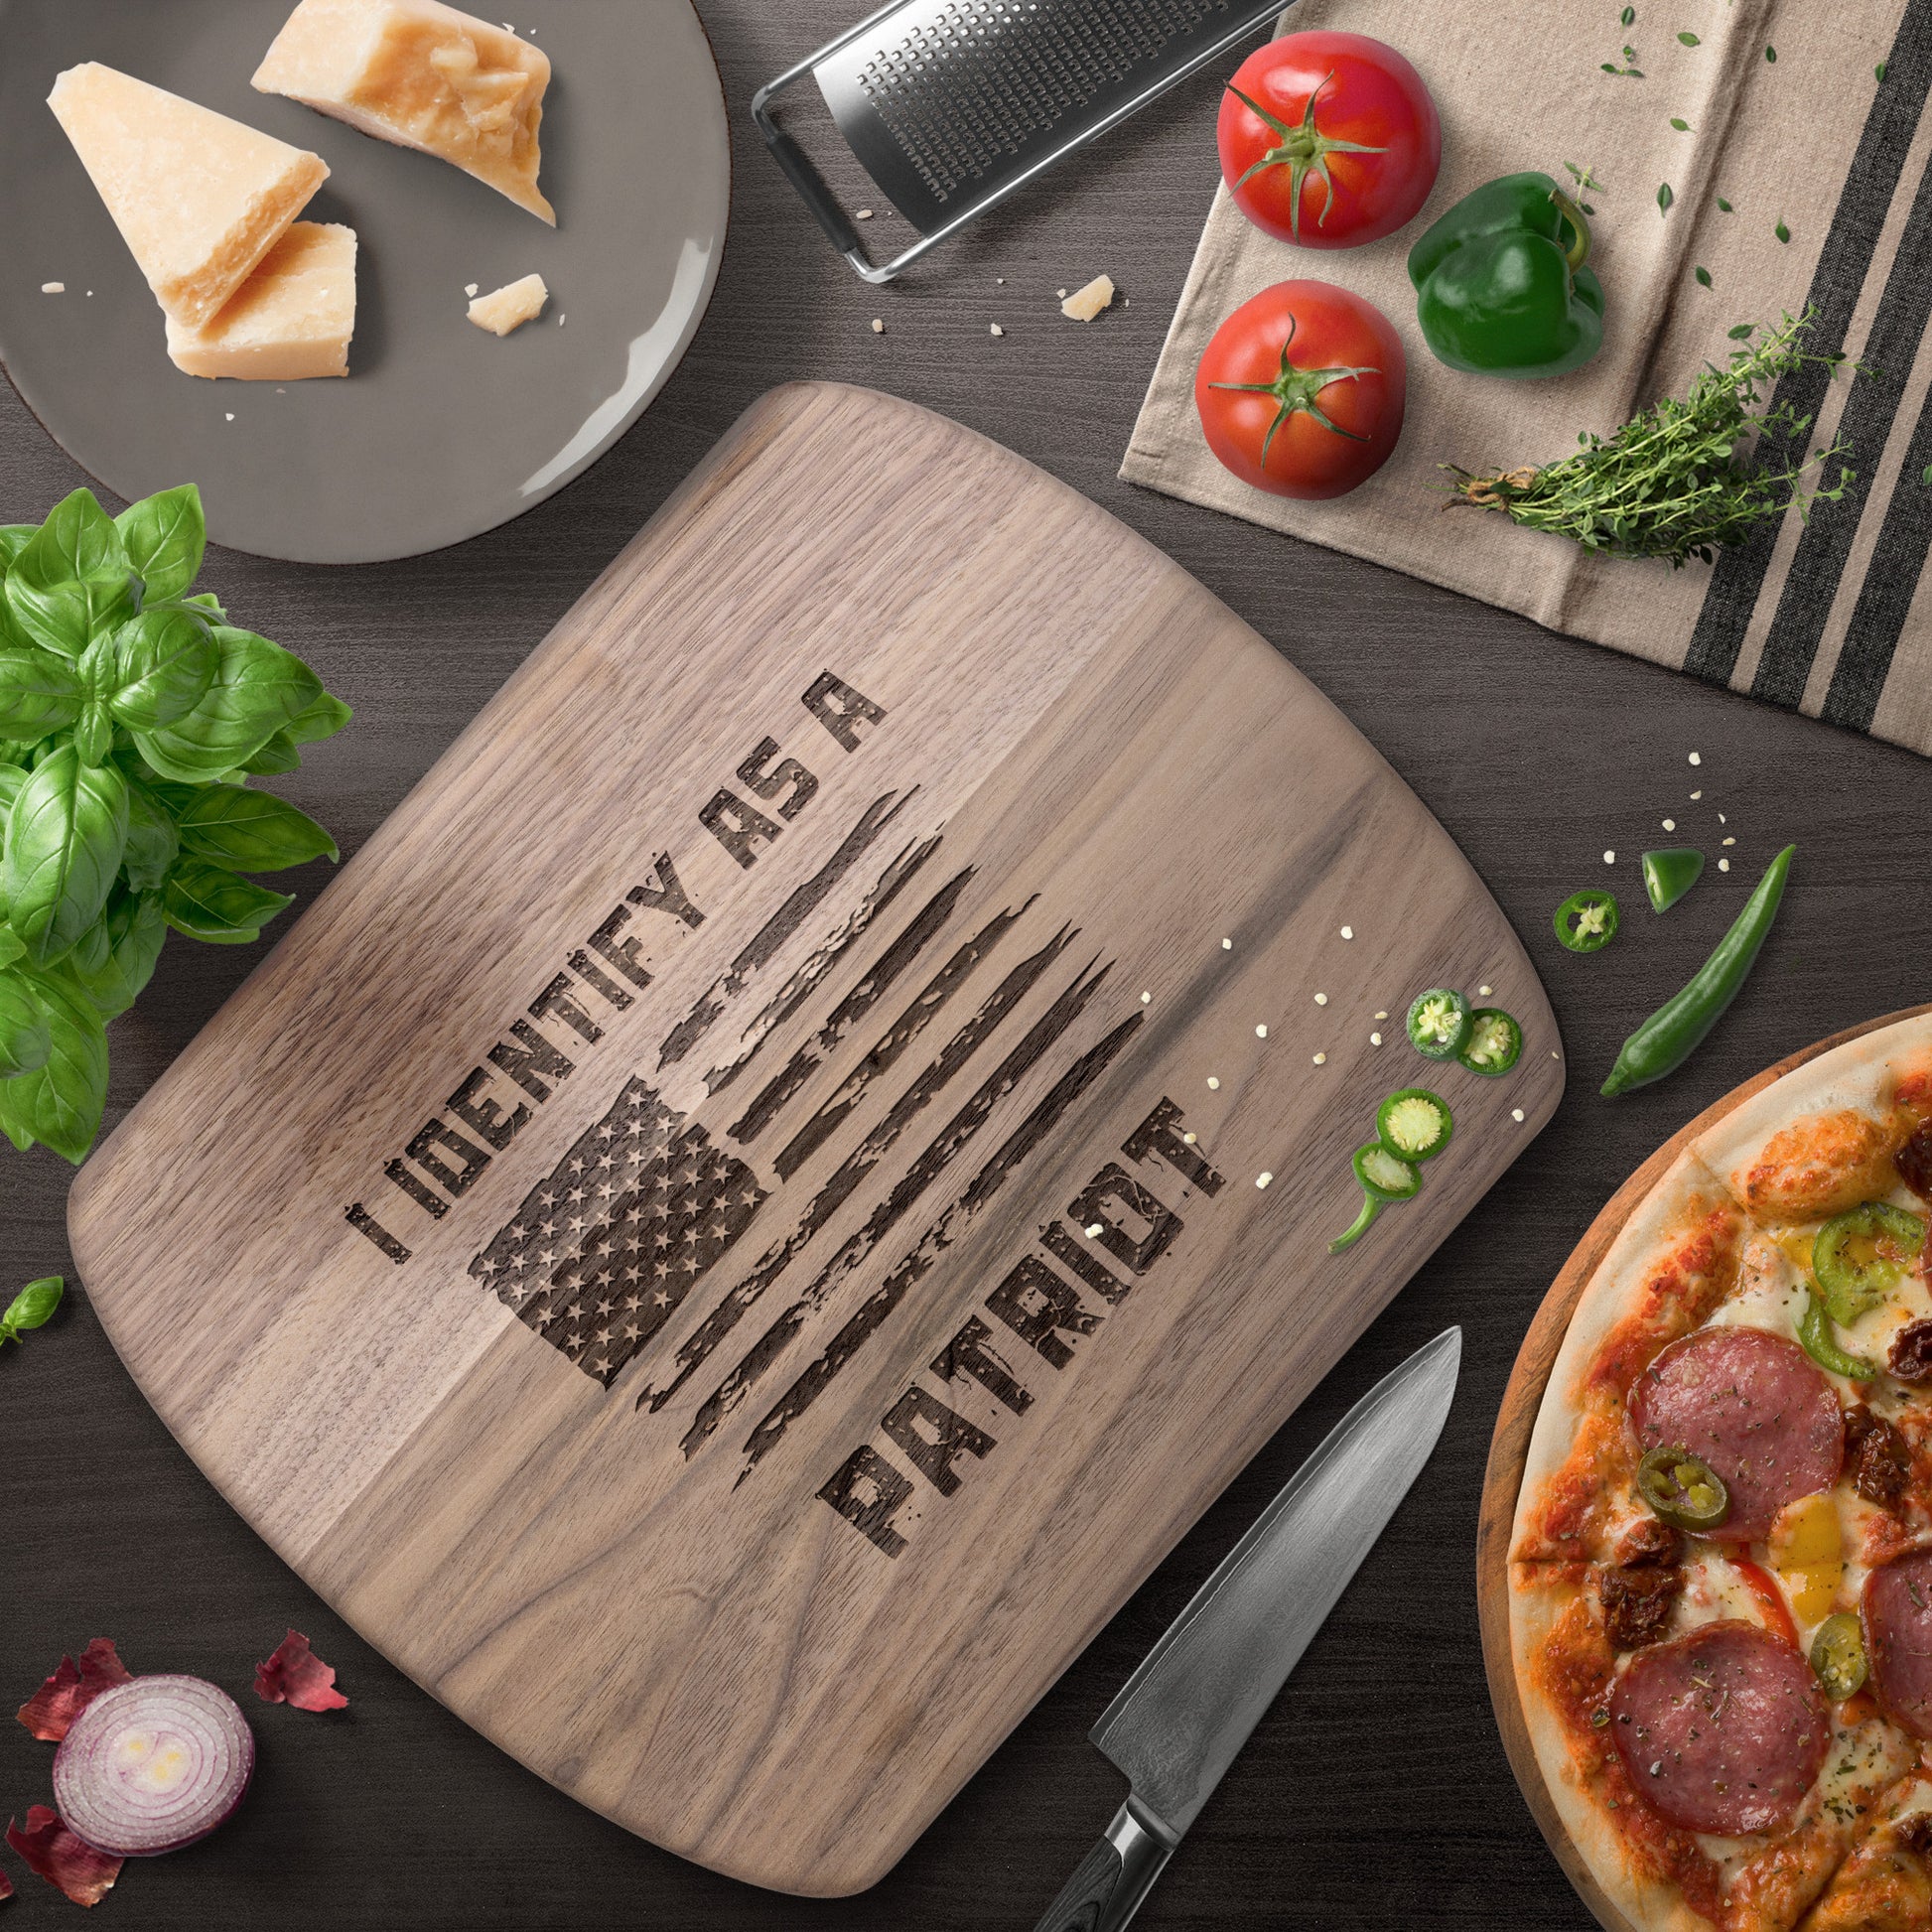 "I Identify As A Patriot" Hardwood Cutting Board - Weave Got Gifts - Unique Gifts You Won’t Find Anywhere Else!